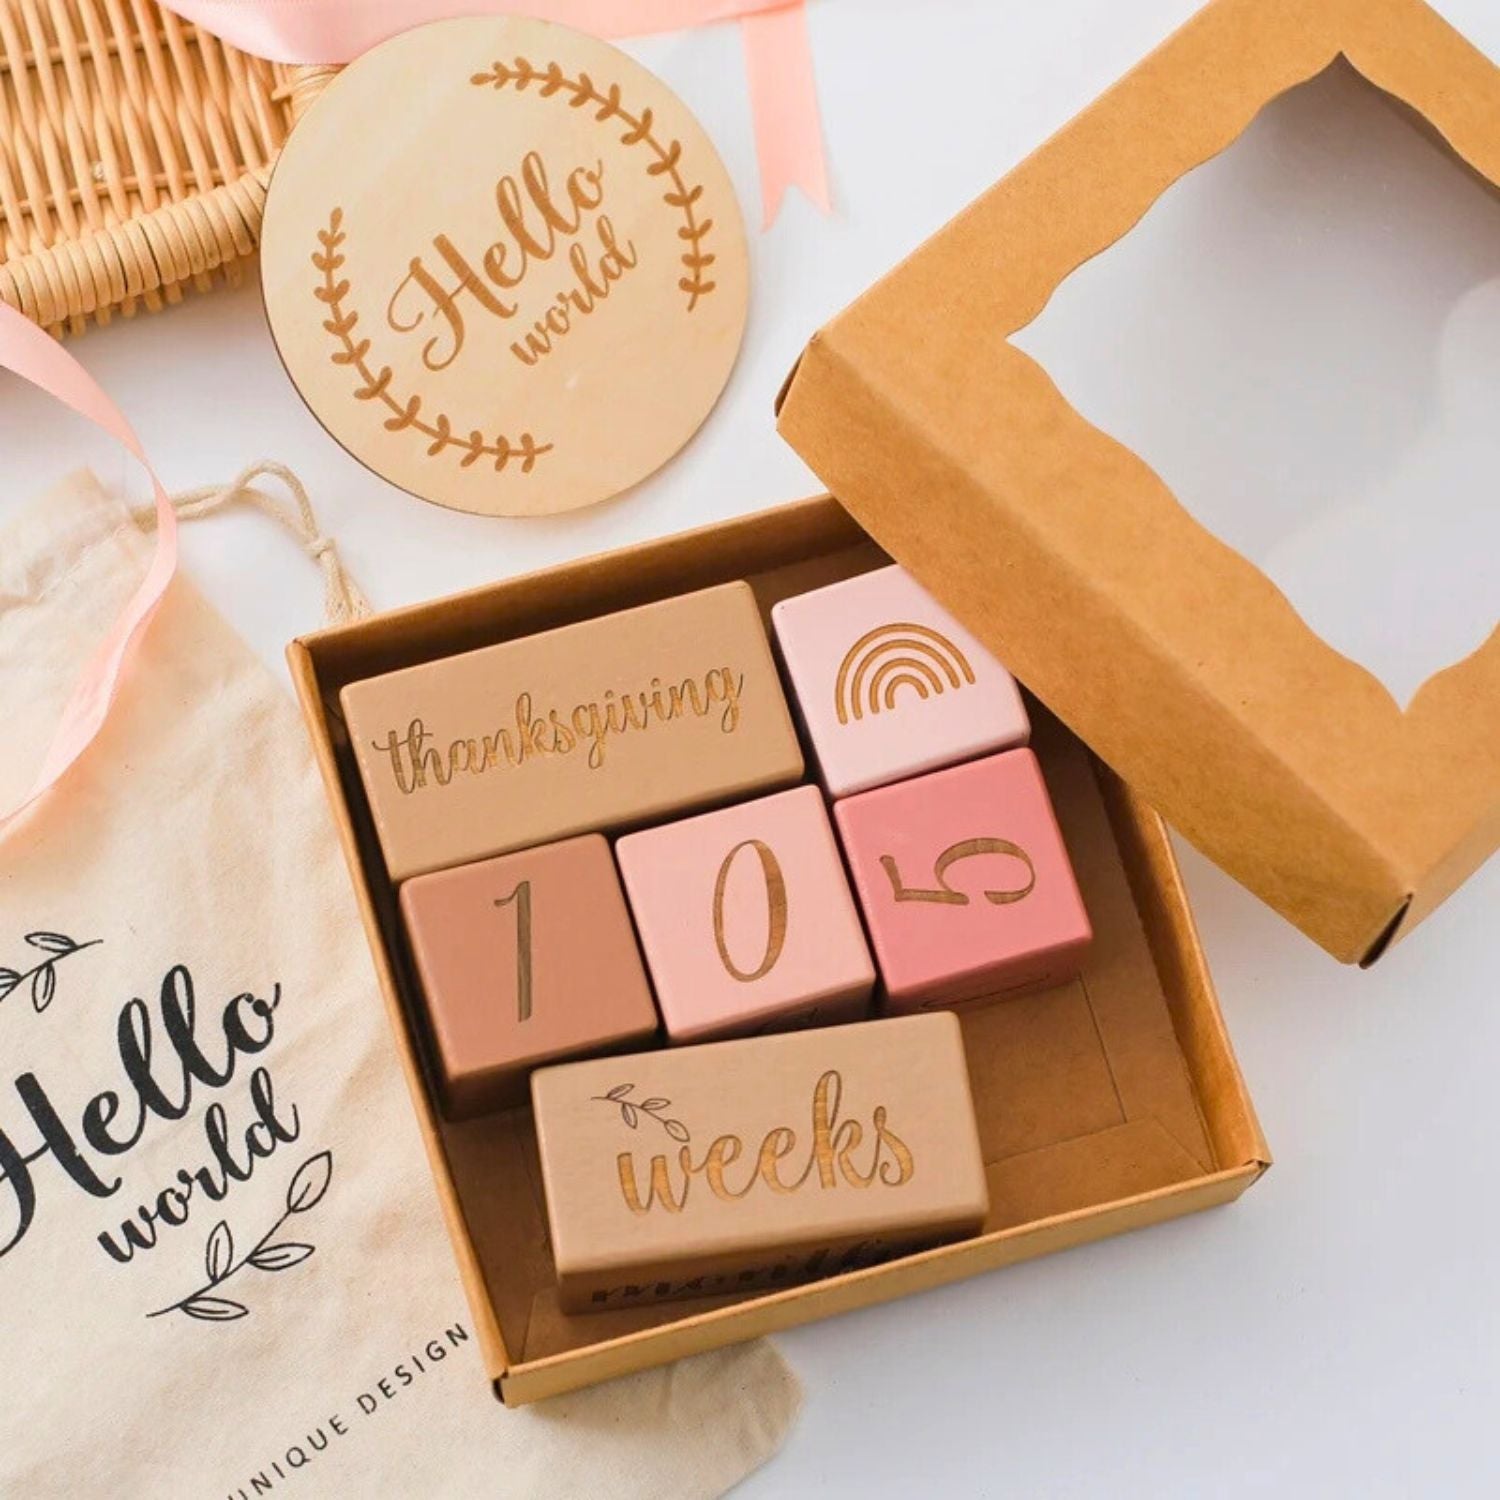 Wooden baby milestone blocks pink and natural wood color in an opened gift box